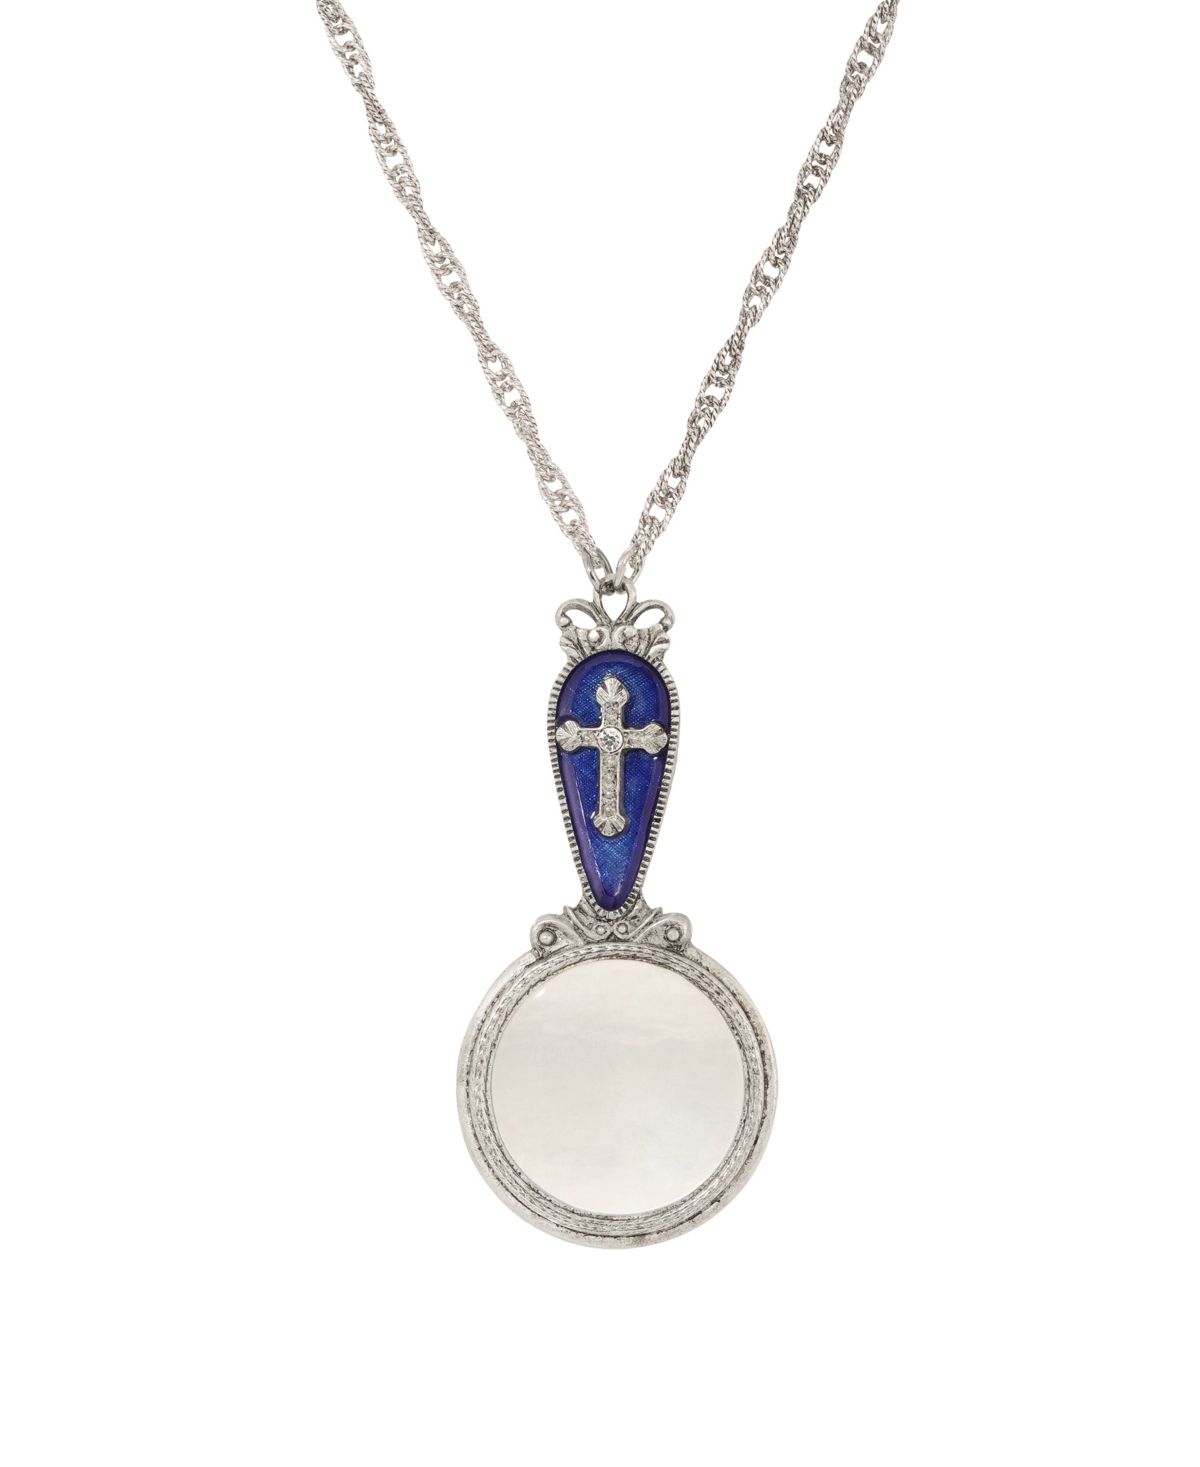 2028 Symbols Of Faith Enamel Cross Magnifying Glass Necklace In Blue